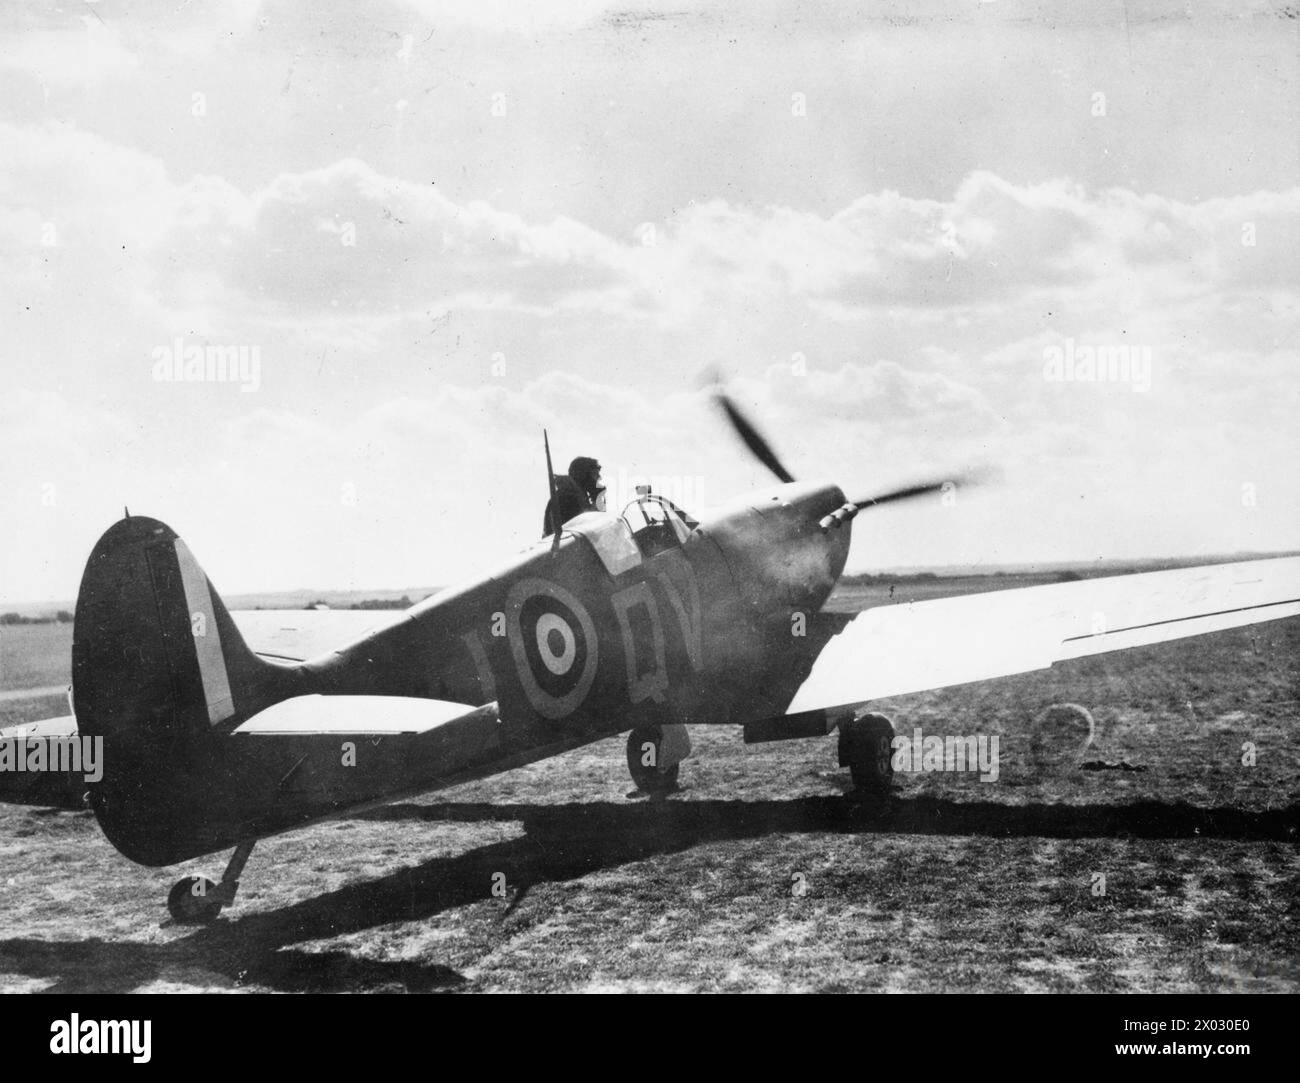 THE BATTLE OF BRITAIN 1940 - A Spitfire pilot climbs into his aircraft, X4474 QV-I, of No. 19 Squadron RAF, at Fowlmere, September 1940 Stock Photo